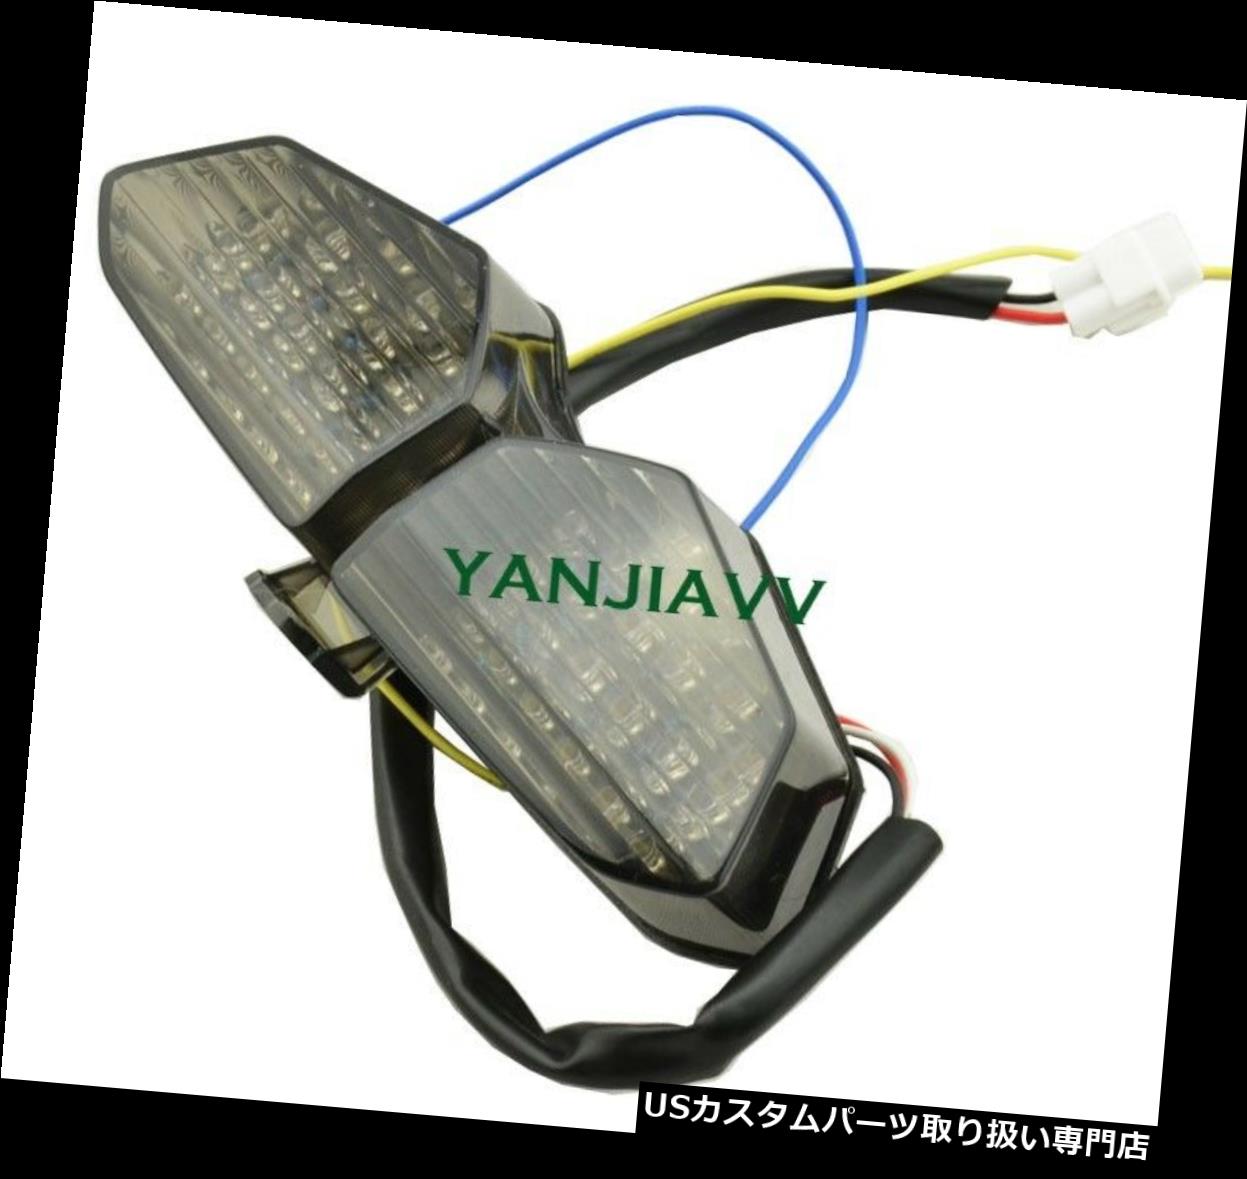 USテールライト 新しい明確な信号はヤマハYZF R6 2003-2005 R6S 2006-2008のためのテールライトを導きました New Clear Signal Led Tail Light For Yamaha YZF R6 2003-2005 R6S 2006-2008